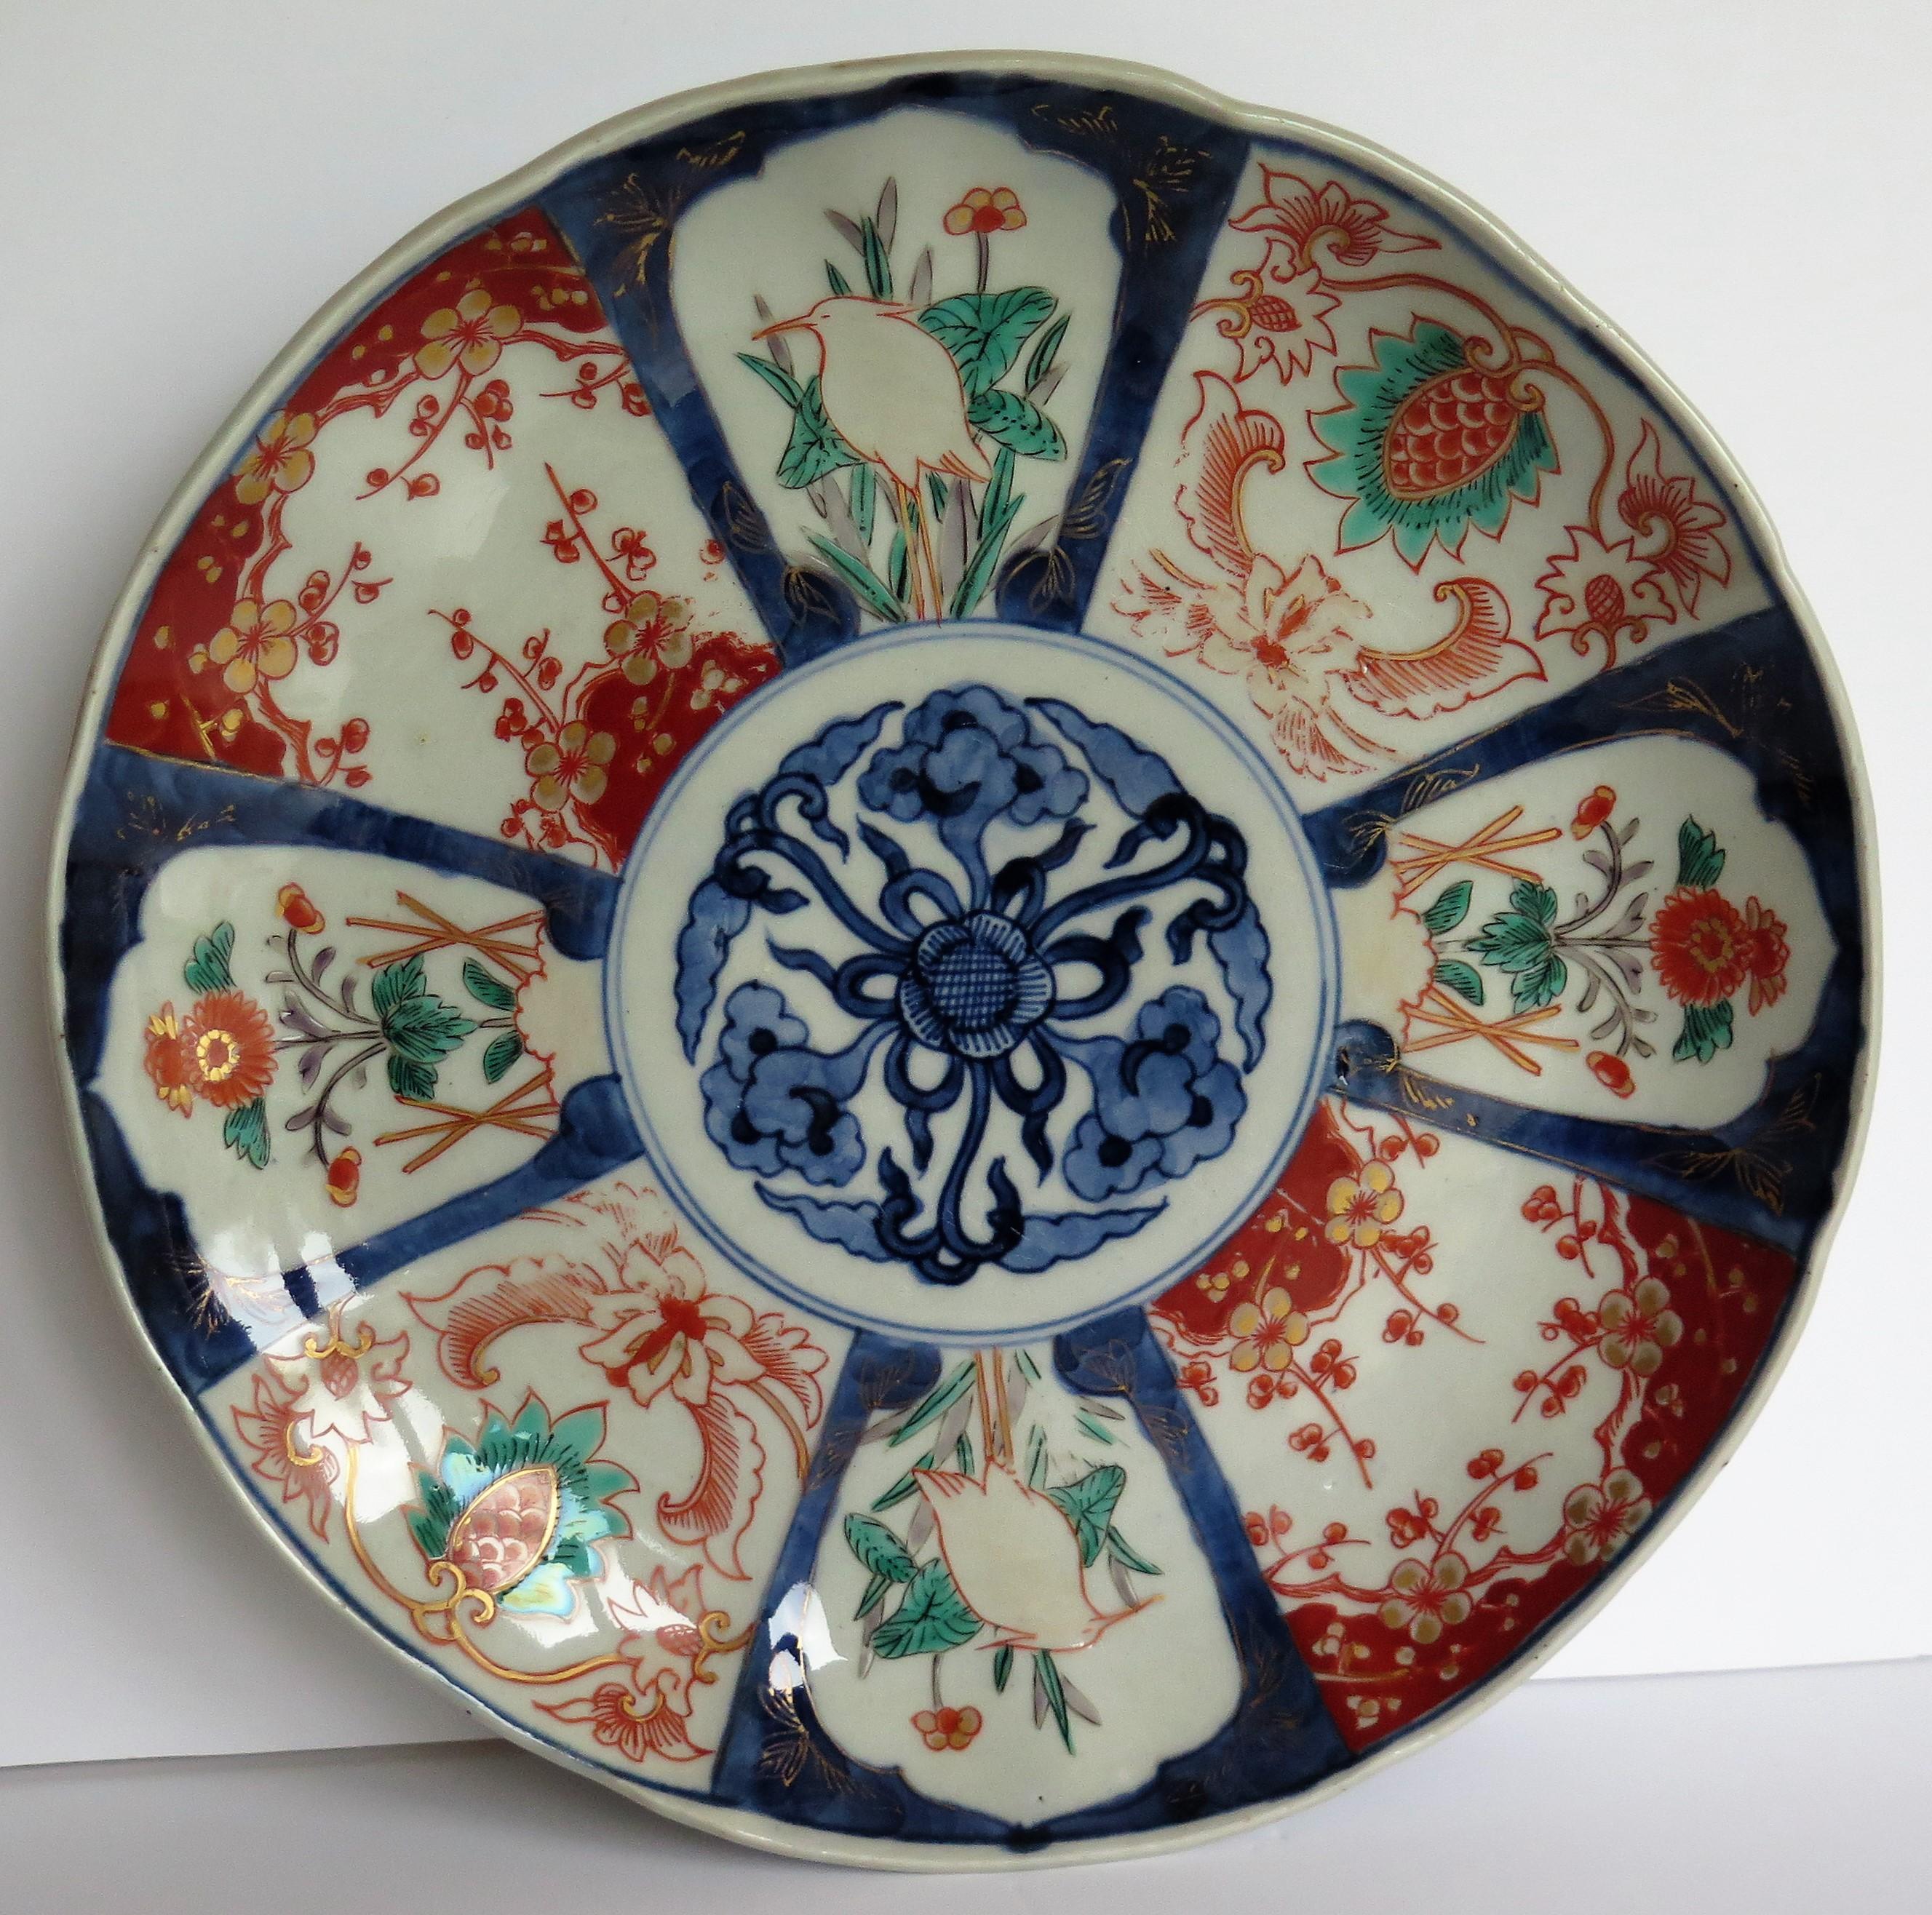 Hand-Painted Japanese Porcelain Large Plate or Hand Painted Imari, 19th Century Meiji Period 